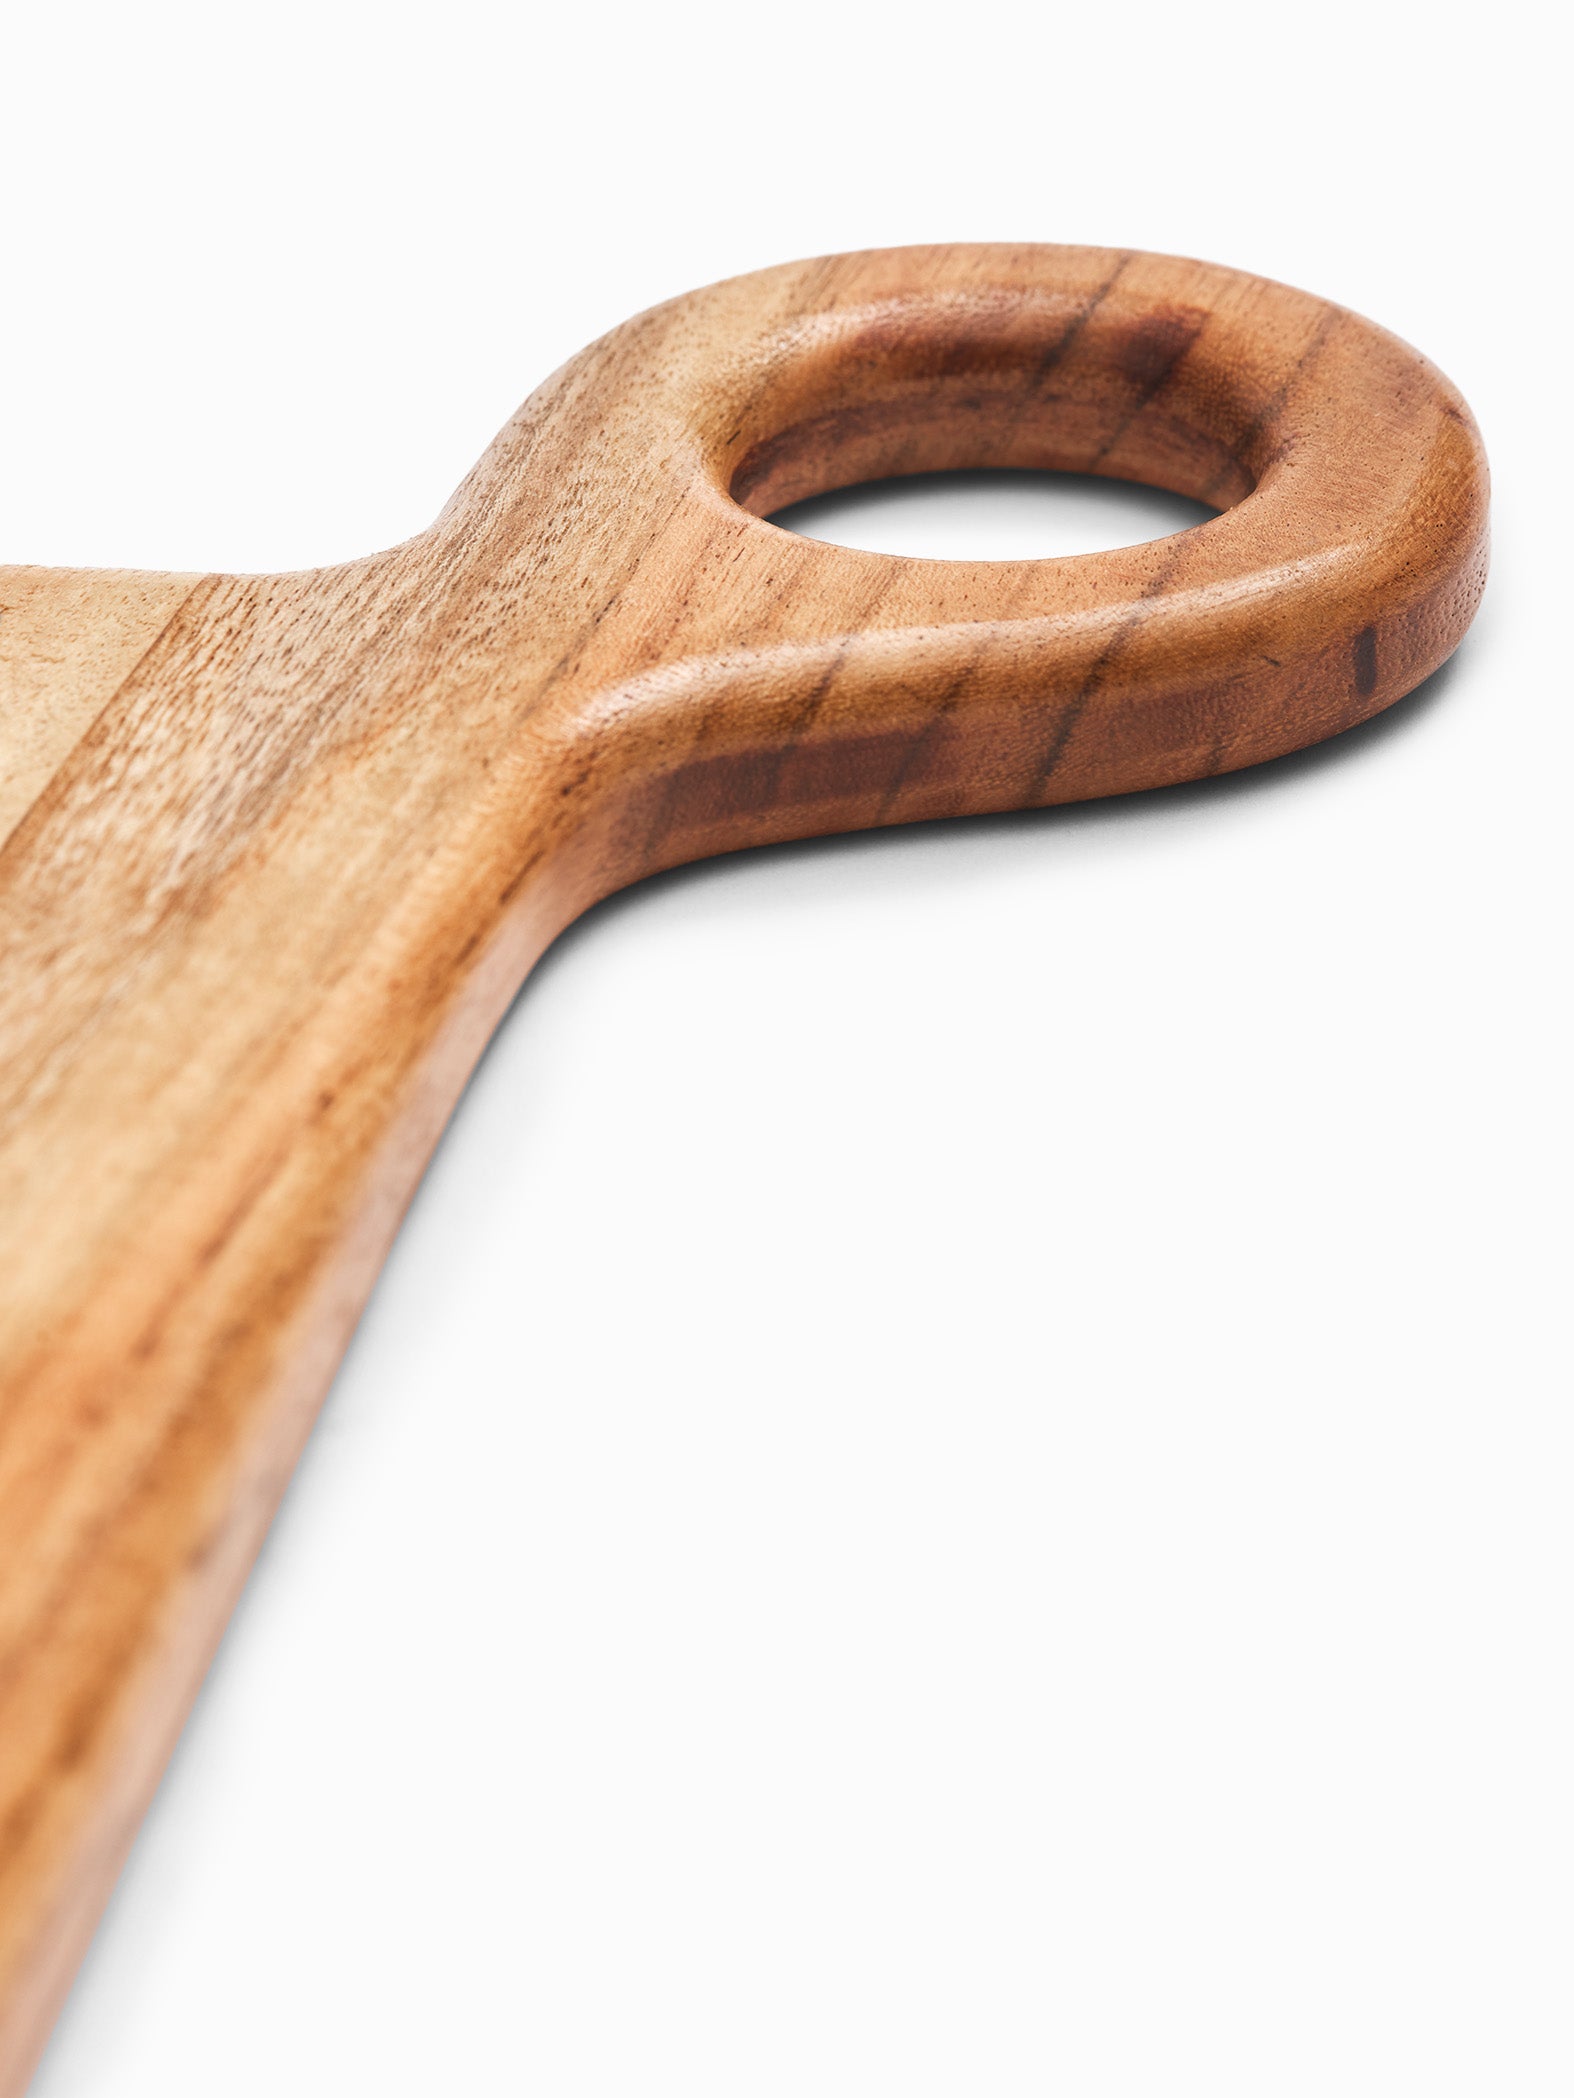 Wooden Half-arch Cheese Board